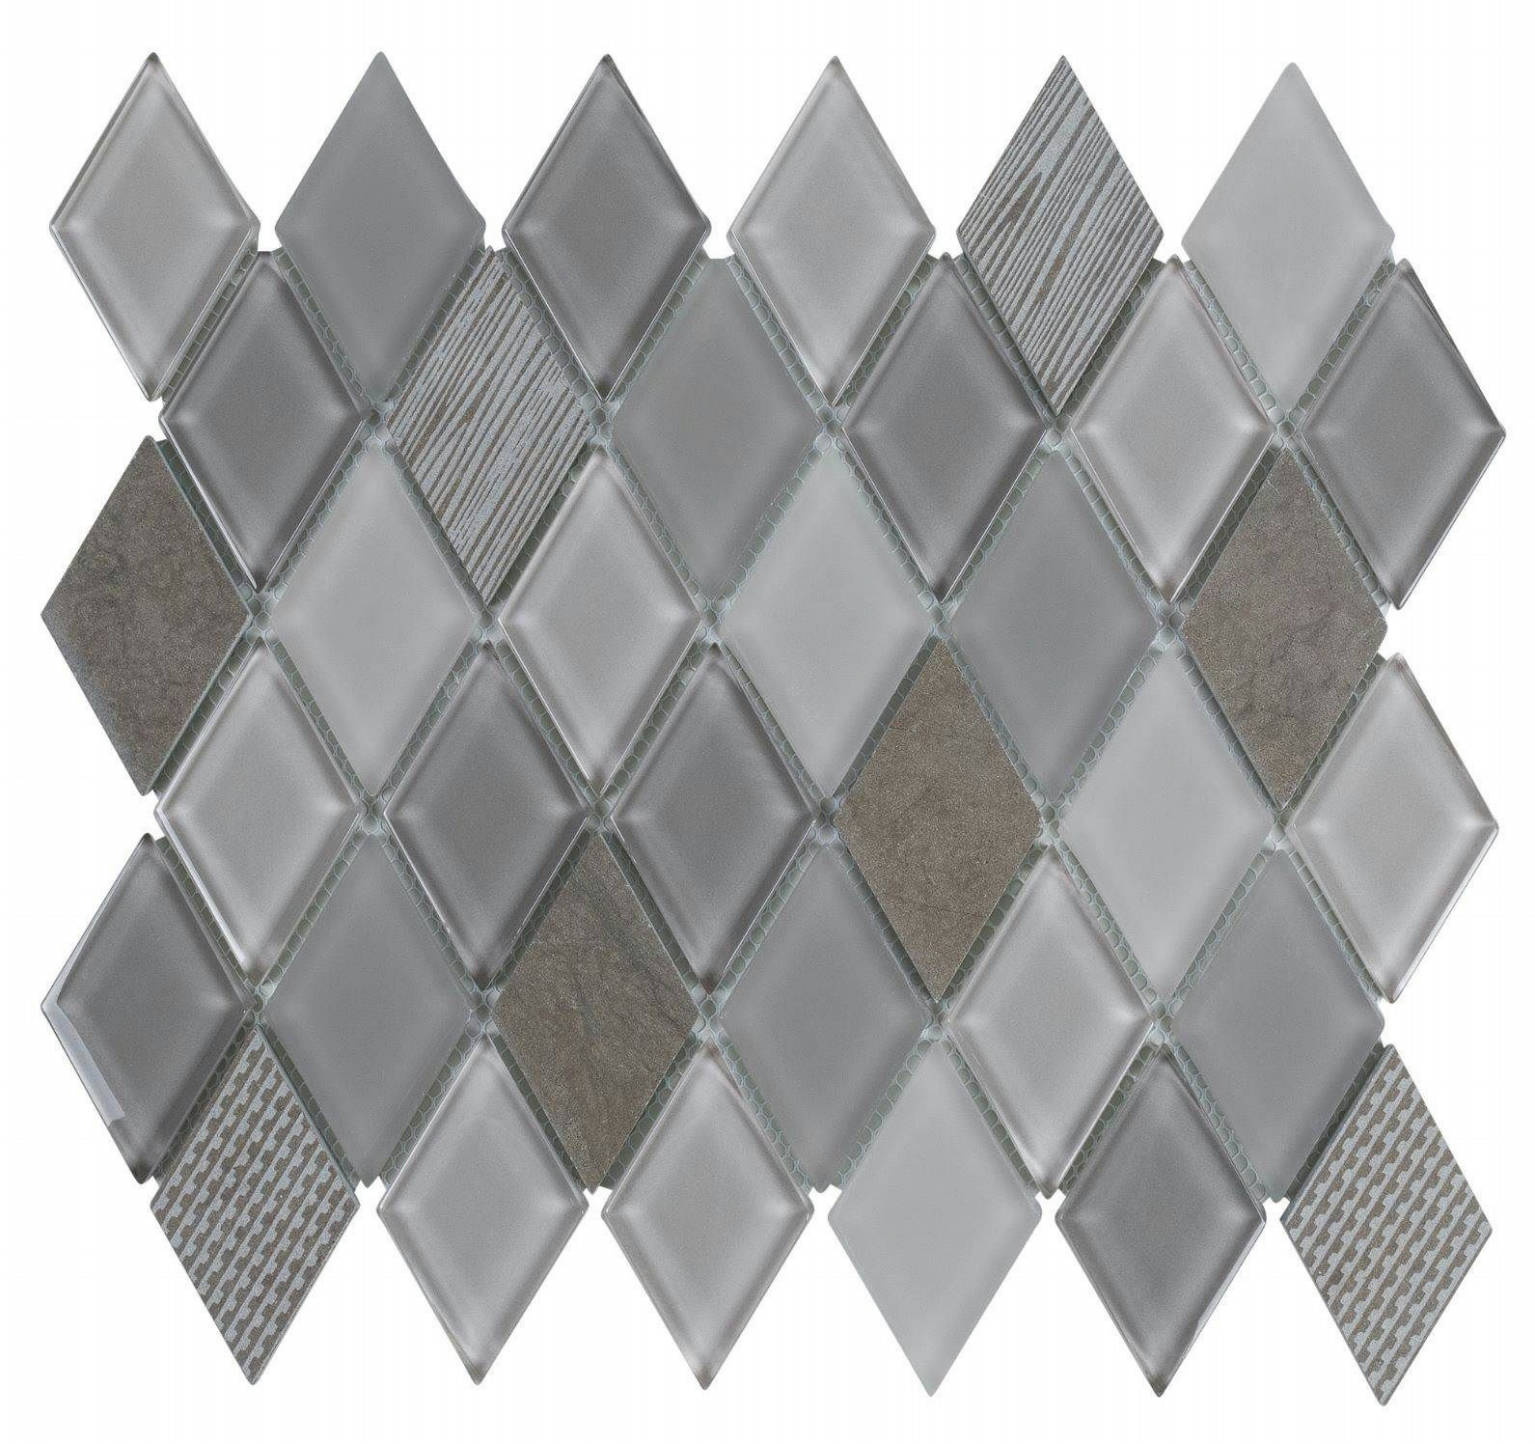 07D | Stones & More | Finest selection of Mosaics, Glass, Tile and Stone